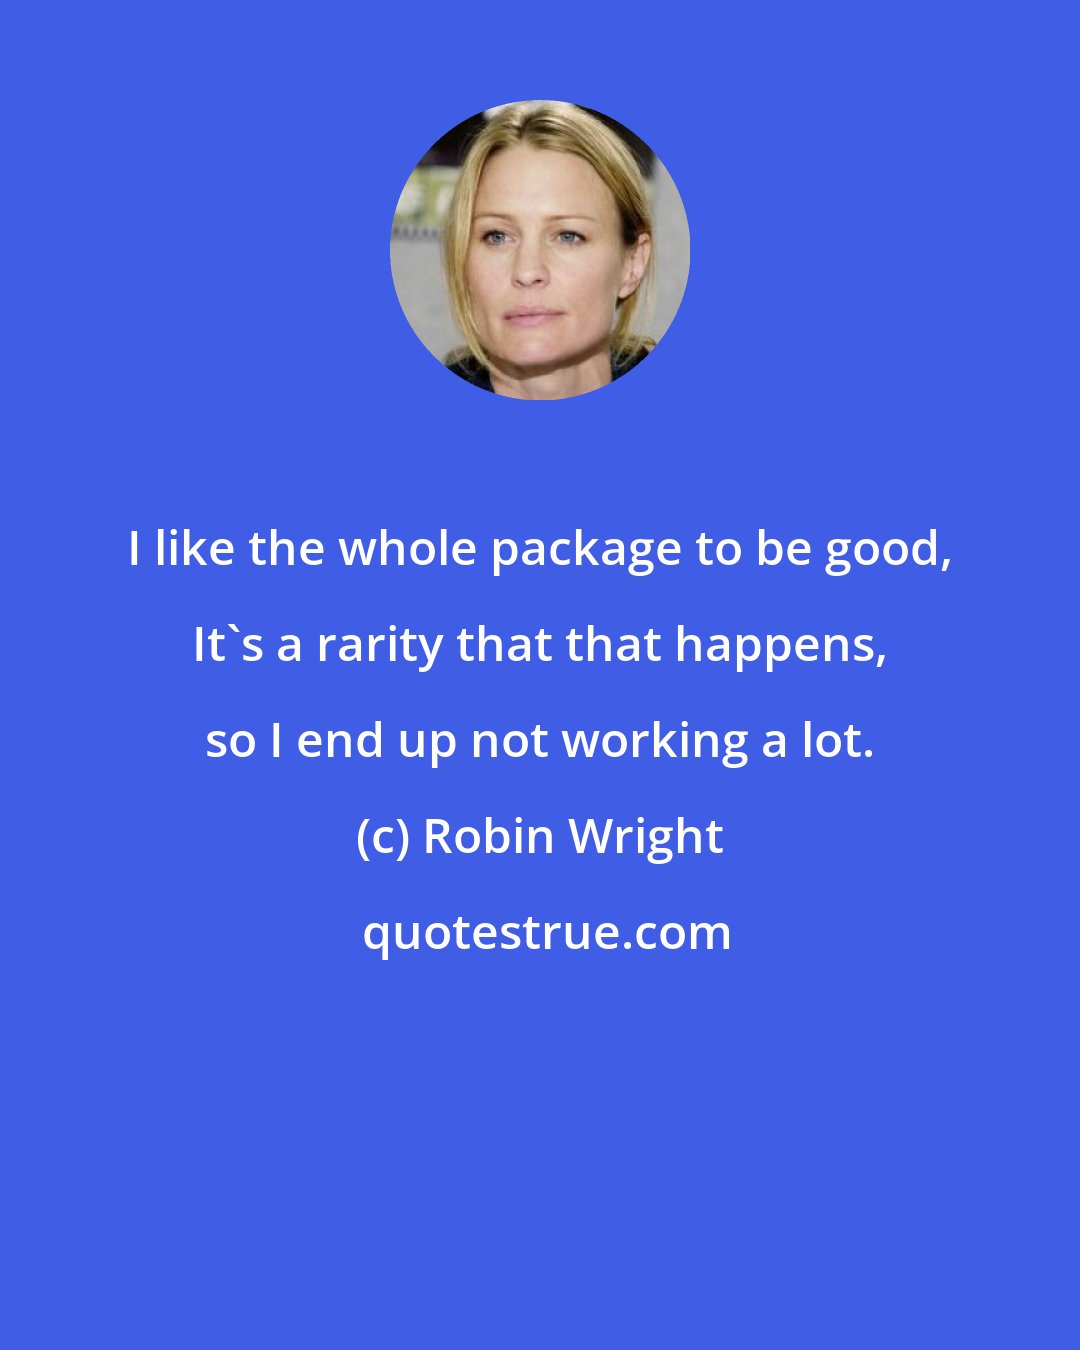 Robin Wright: I like the whole package to be good, It's a rarity that that happens, so I end up not working a lot.